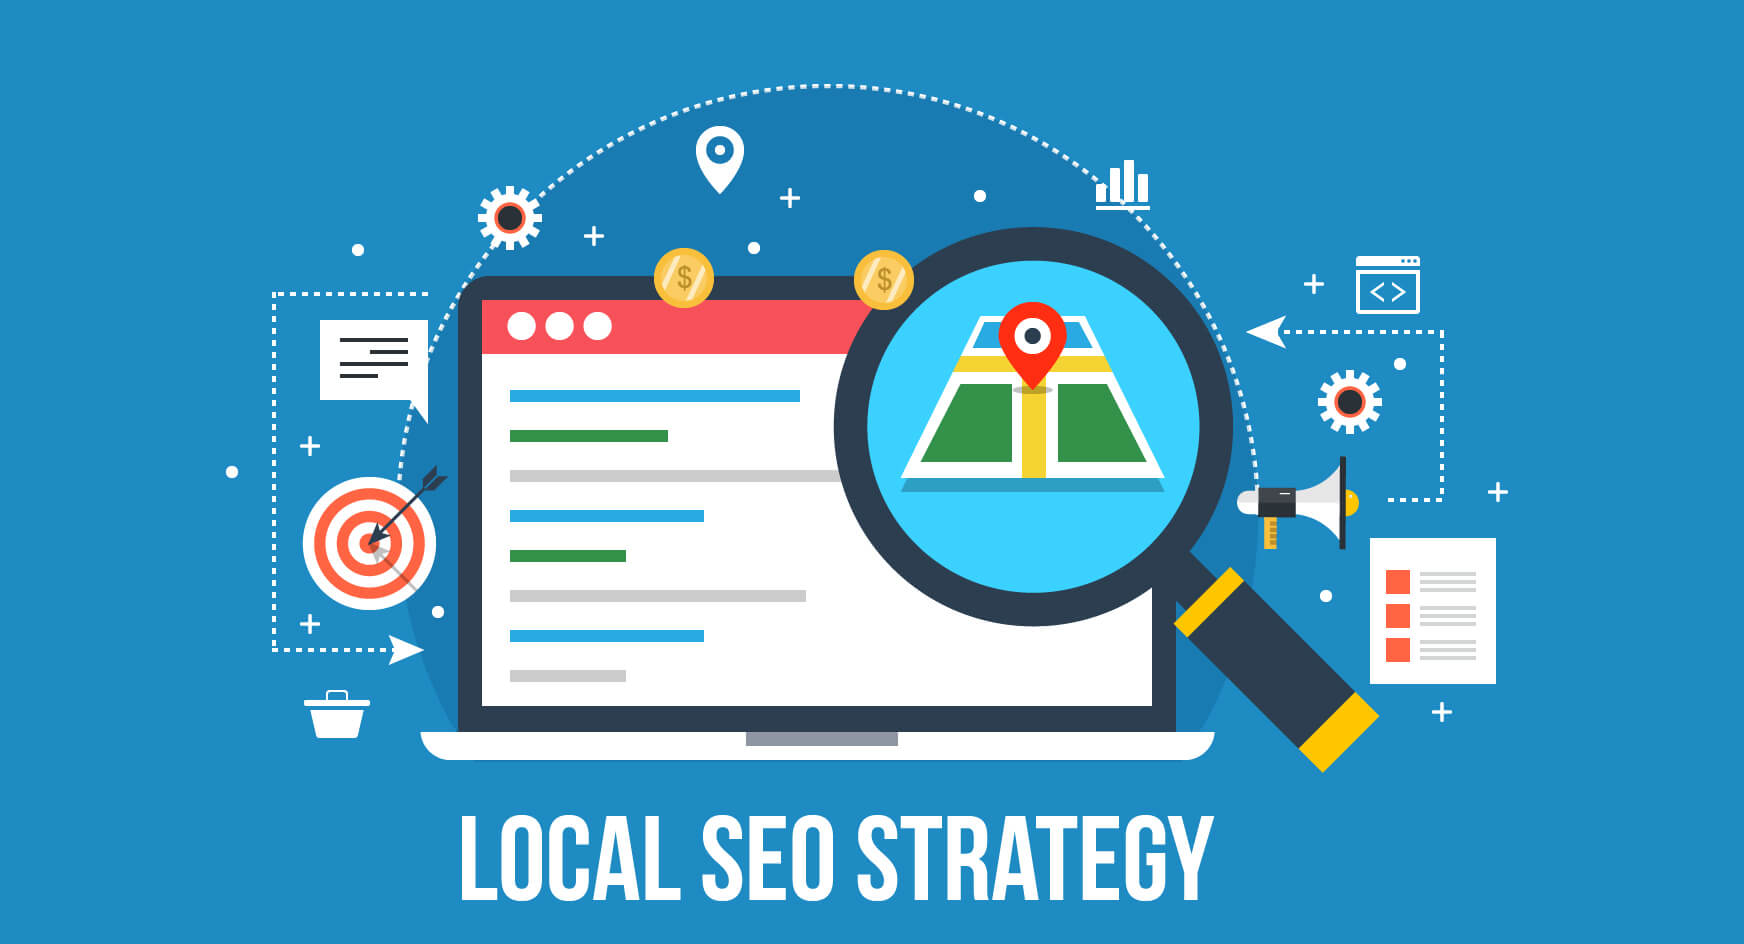 Why local SEO is important